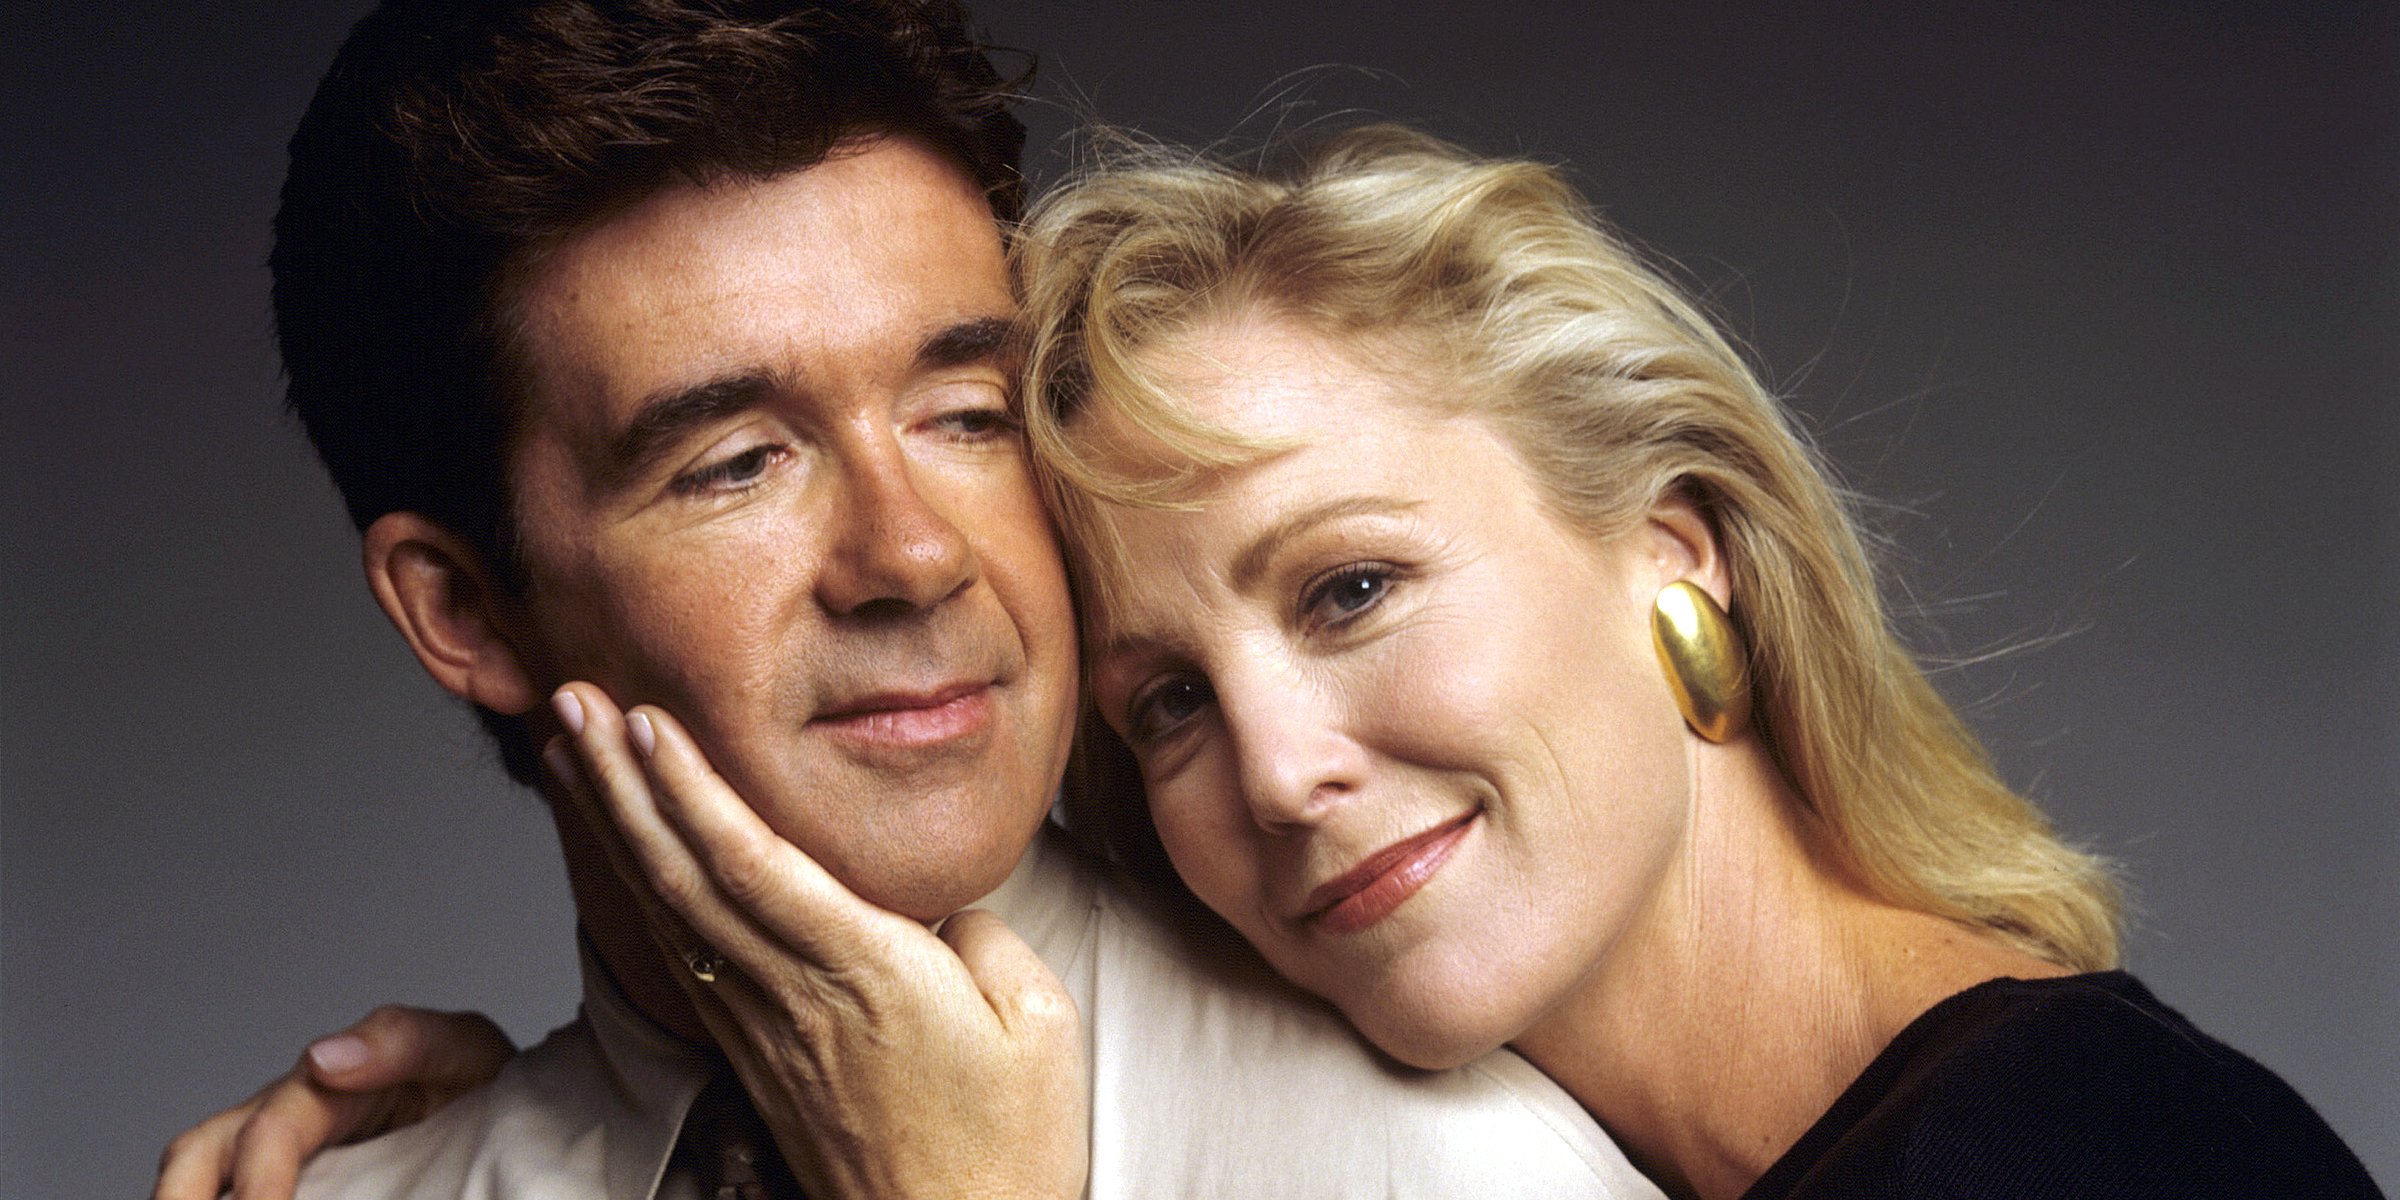 Alan Thicke and Joanna Kerns, 1989 | Source: Getty Images